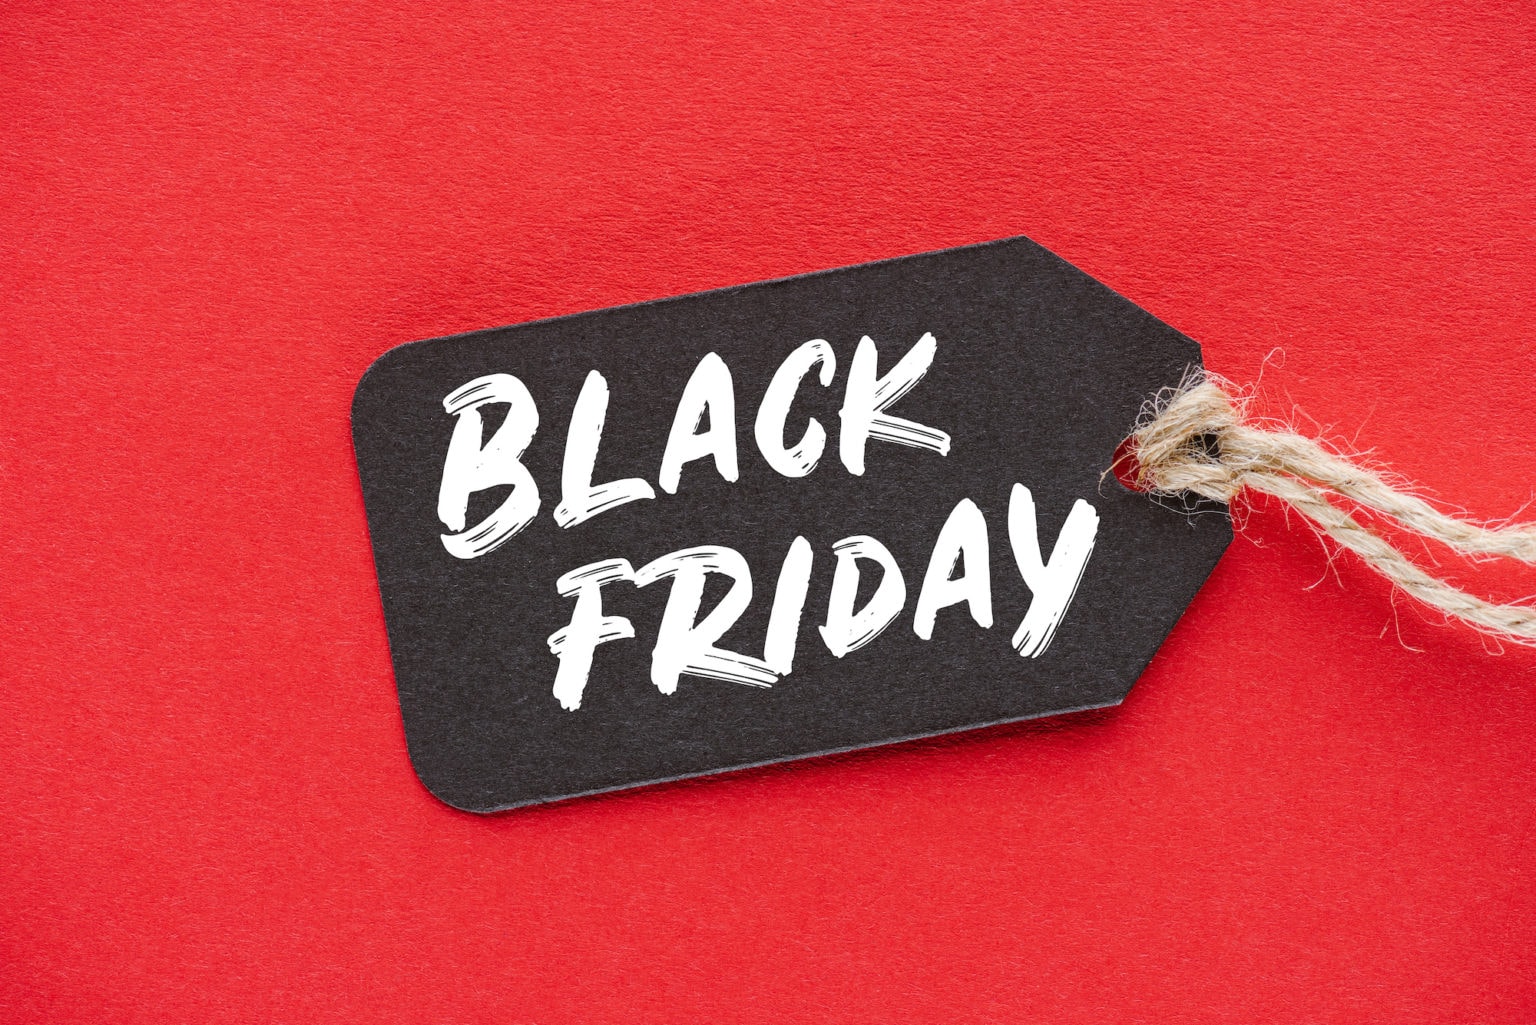 Here are some Black Friday deals you can score while you’re in those